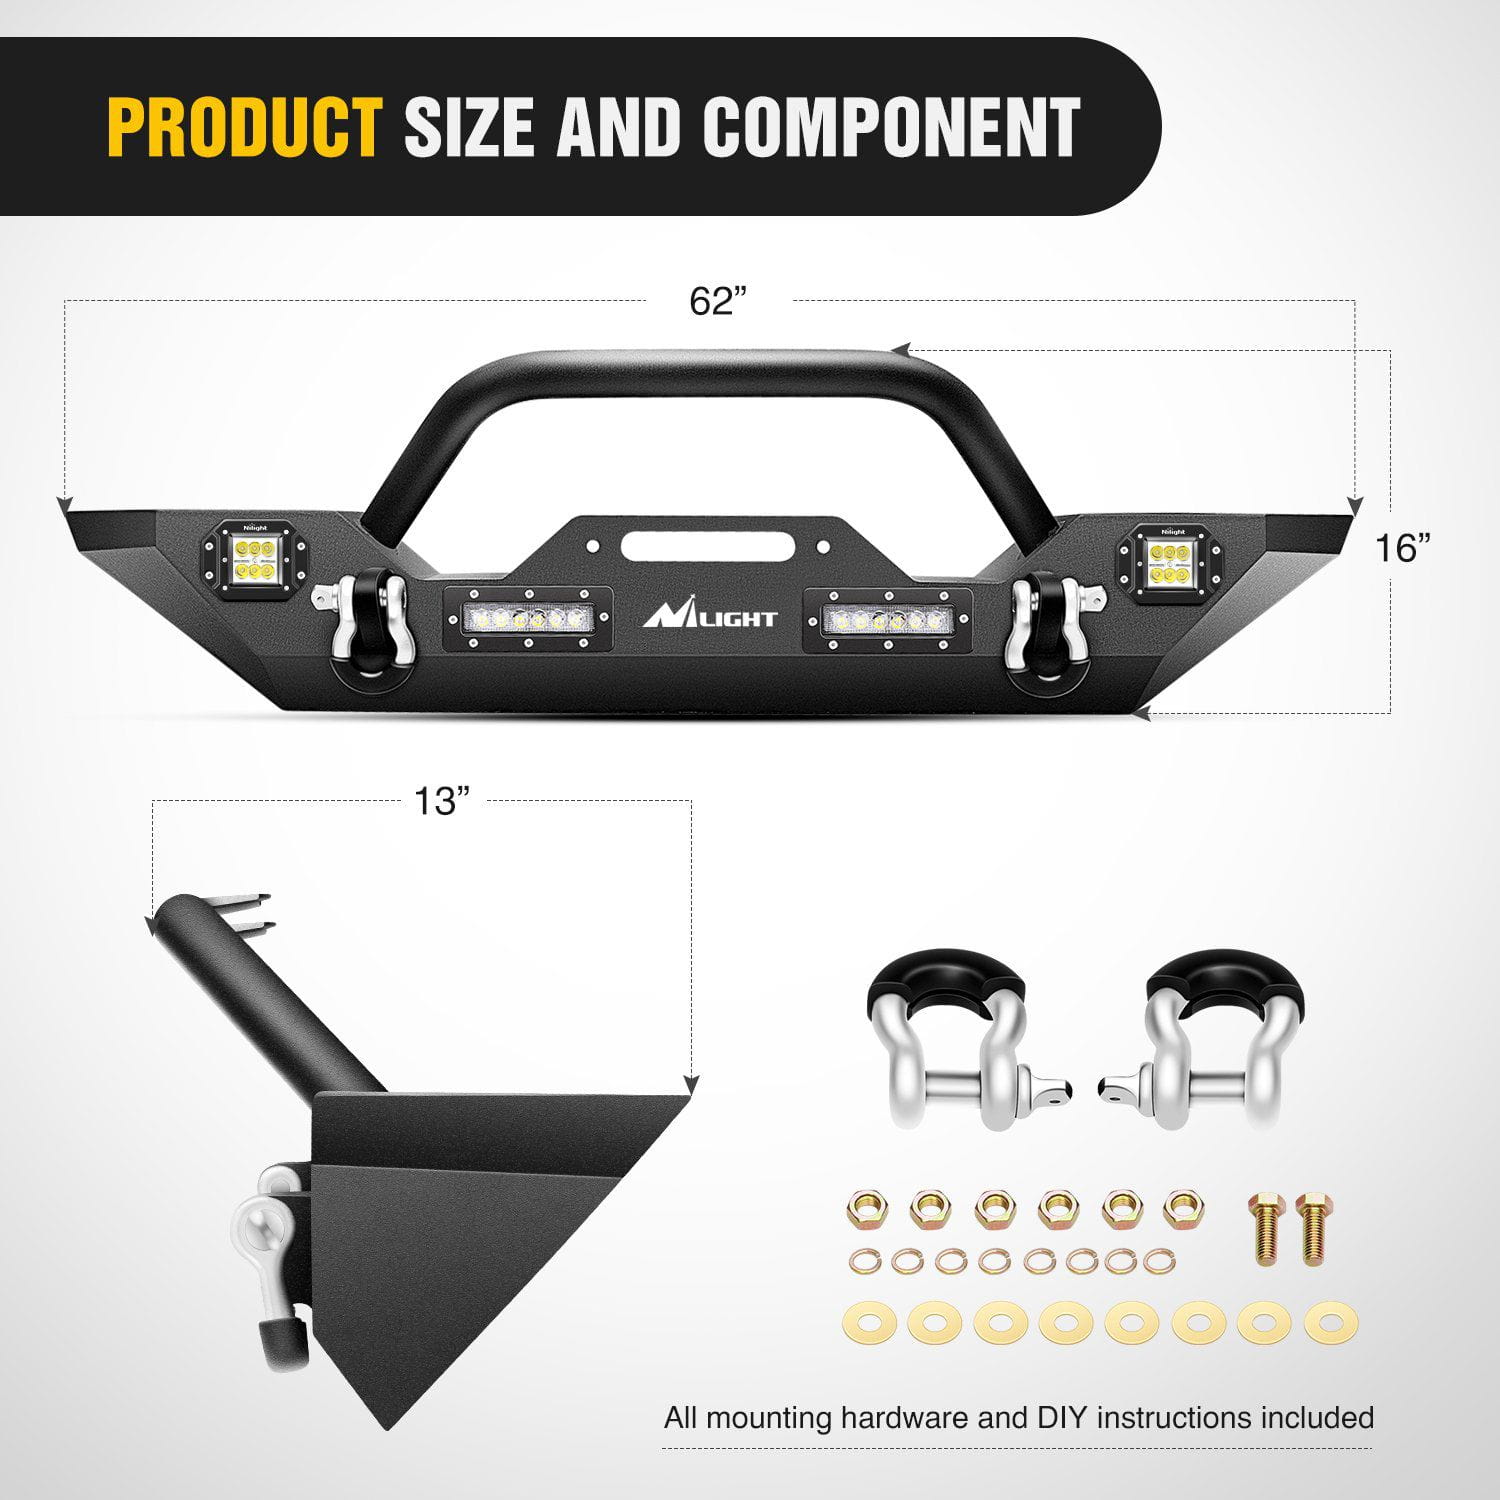 Product Size and Component of Nilight Front Bumper Kit A For 2007-2018 Jeep Wrangler JK